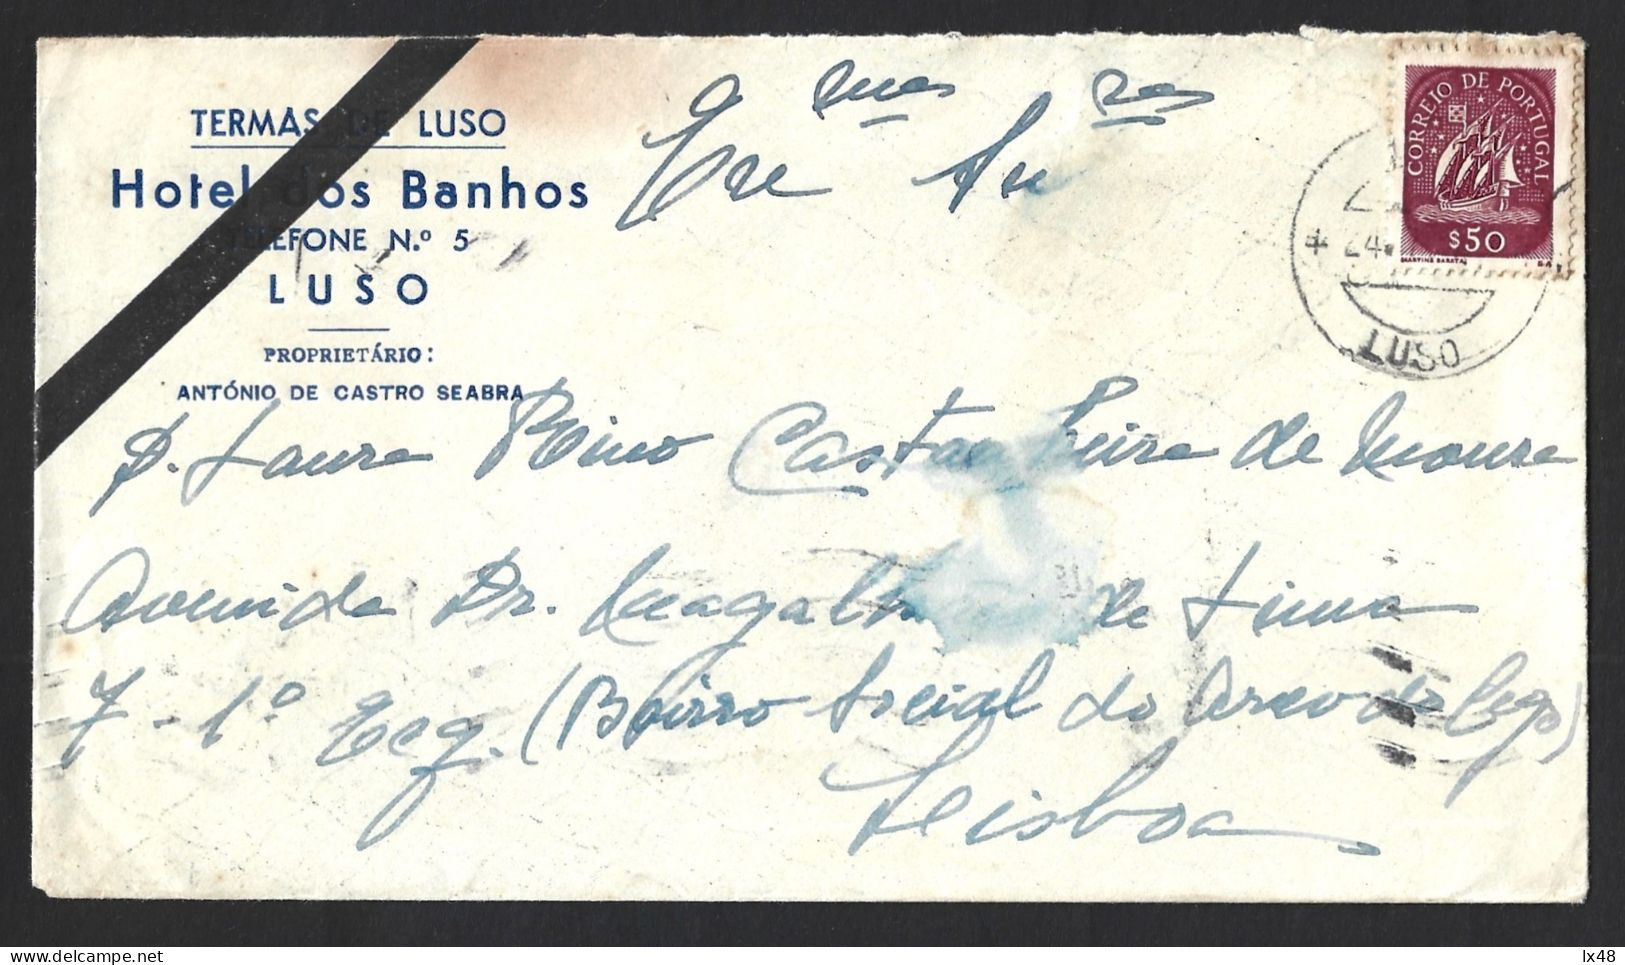 Mourning Letter From Termas Do Luso 1947. Bath Hotel, Luso. Caravela Stamp Obliterated With 'Luso' Brand. Rouwbrief Van - Kuurwezen